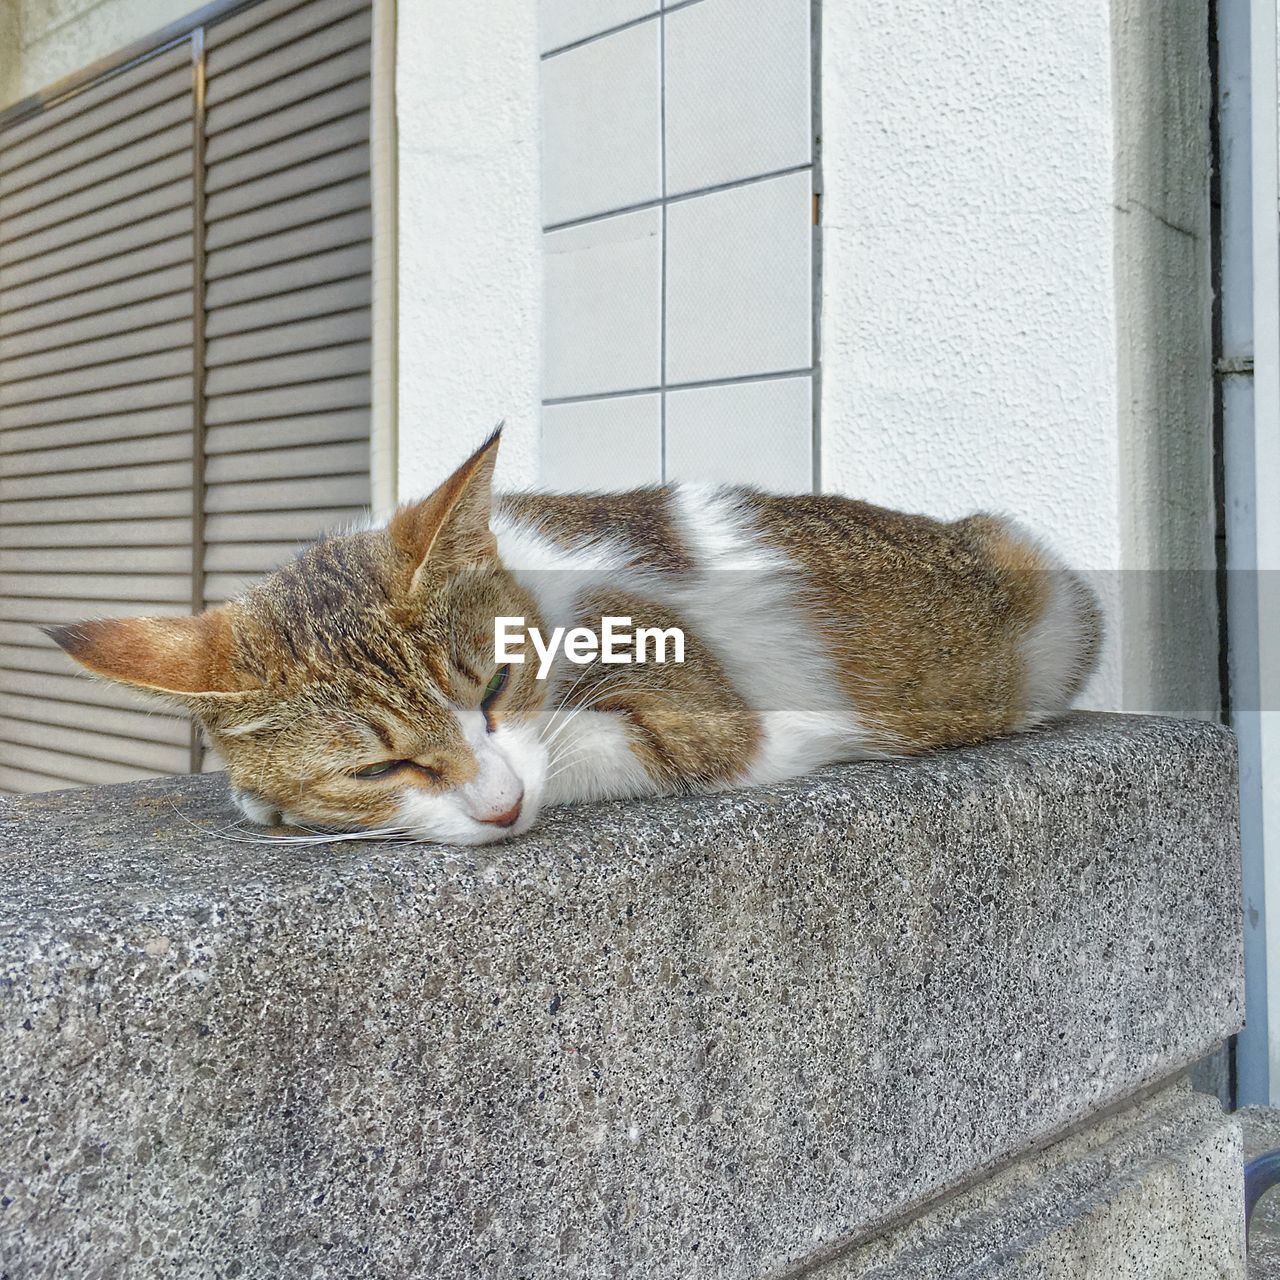 CAT SLEEPING IN FRONT OF A HOUSE